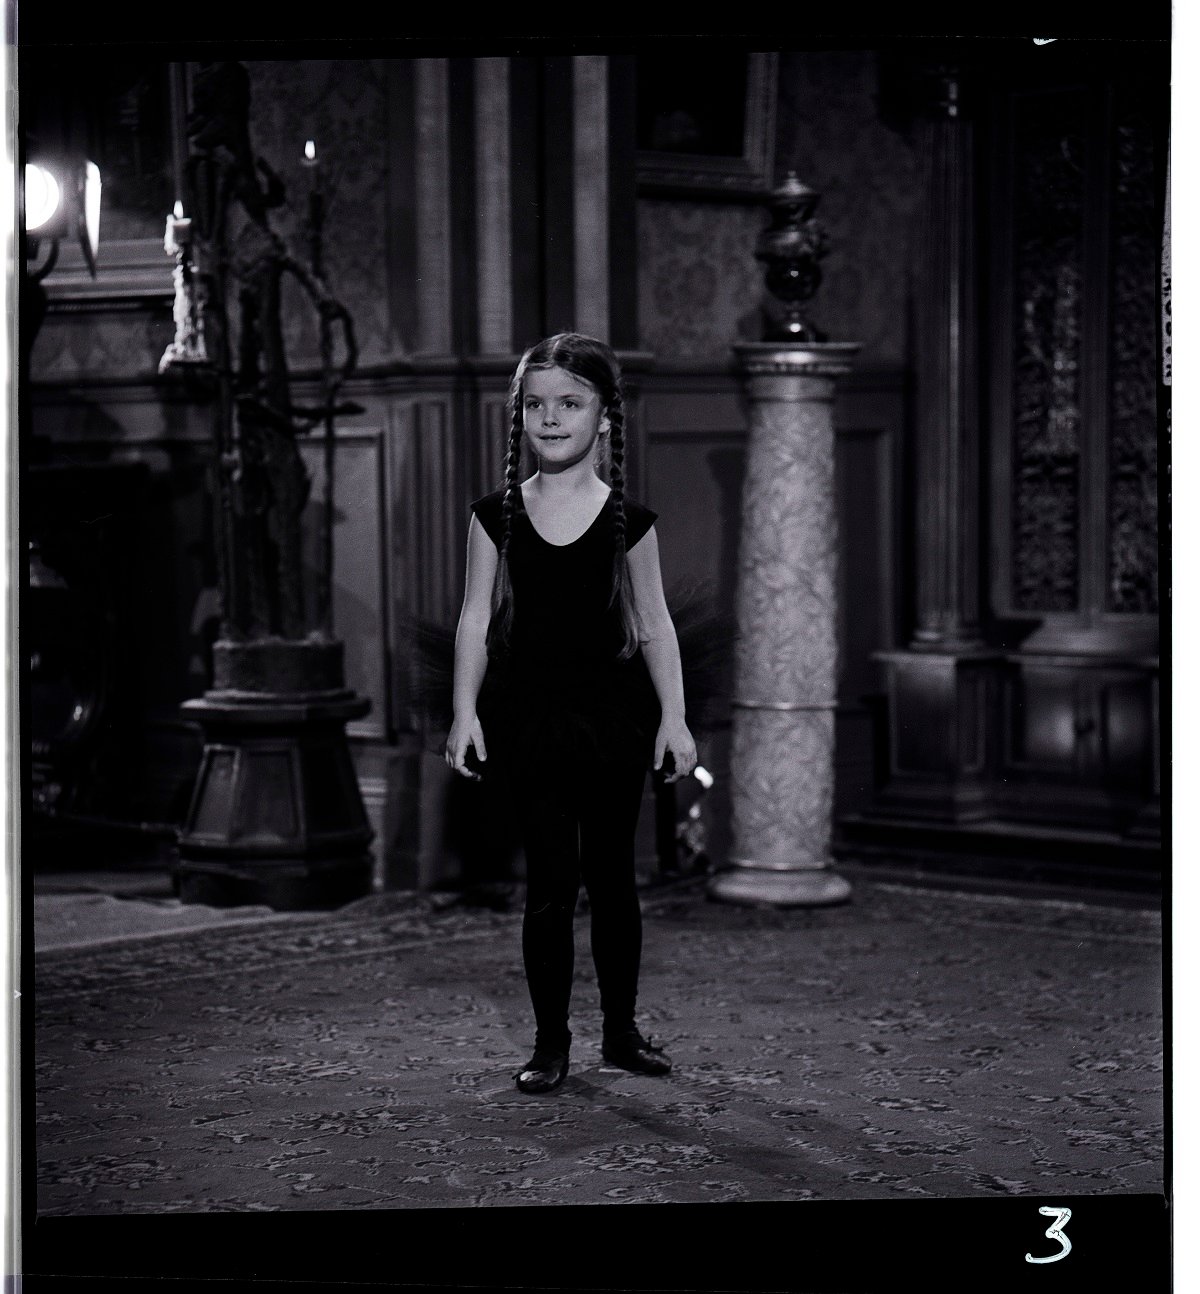 'The Addams Family' star Lisa Loring dressed in a ballerina outfit in a scene from the 1960s series.